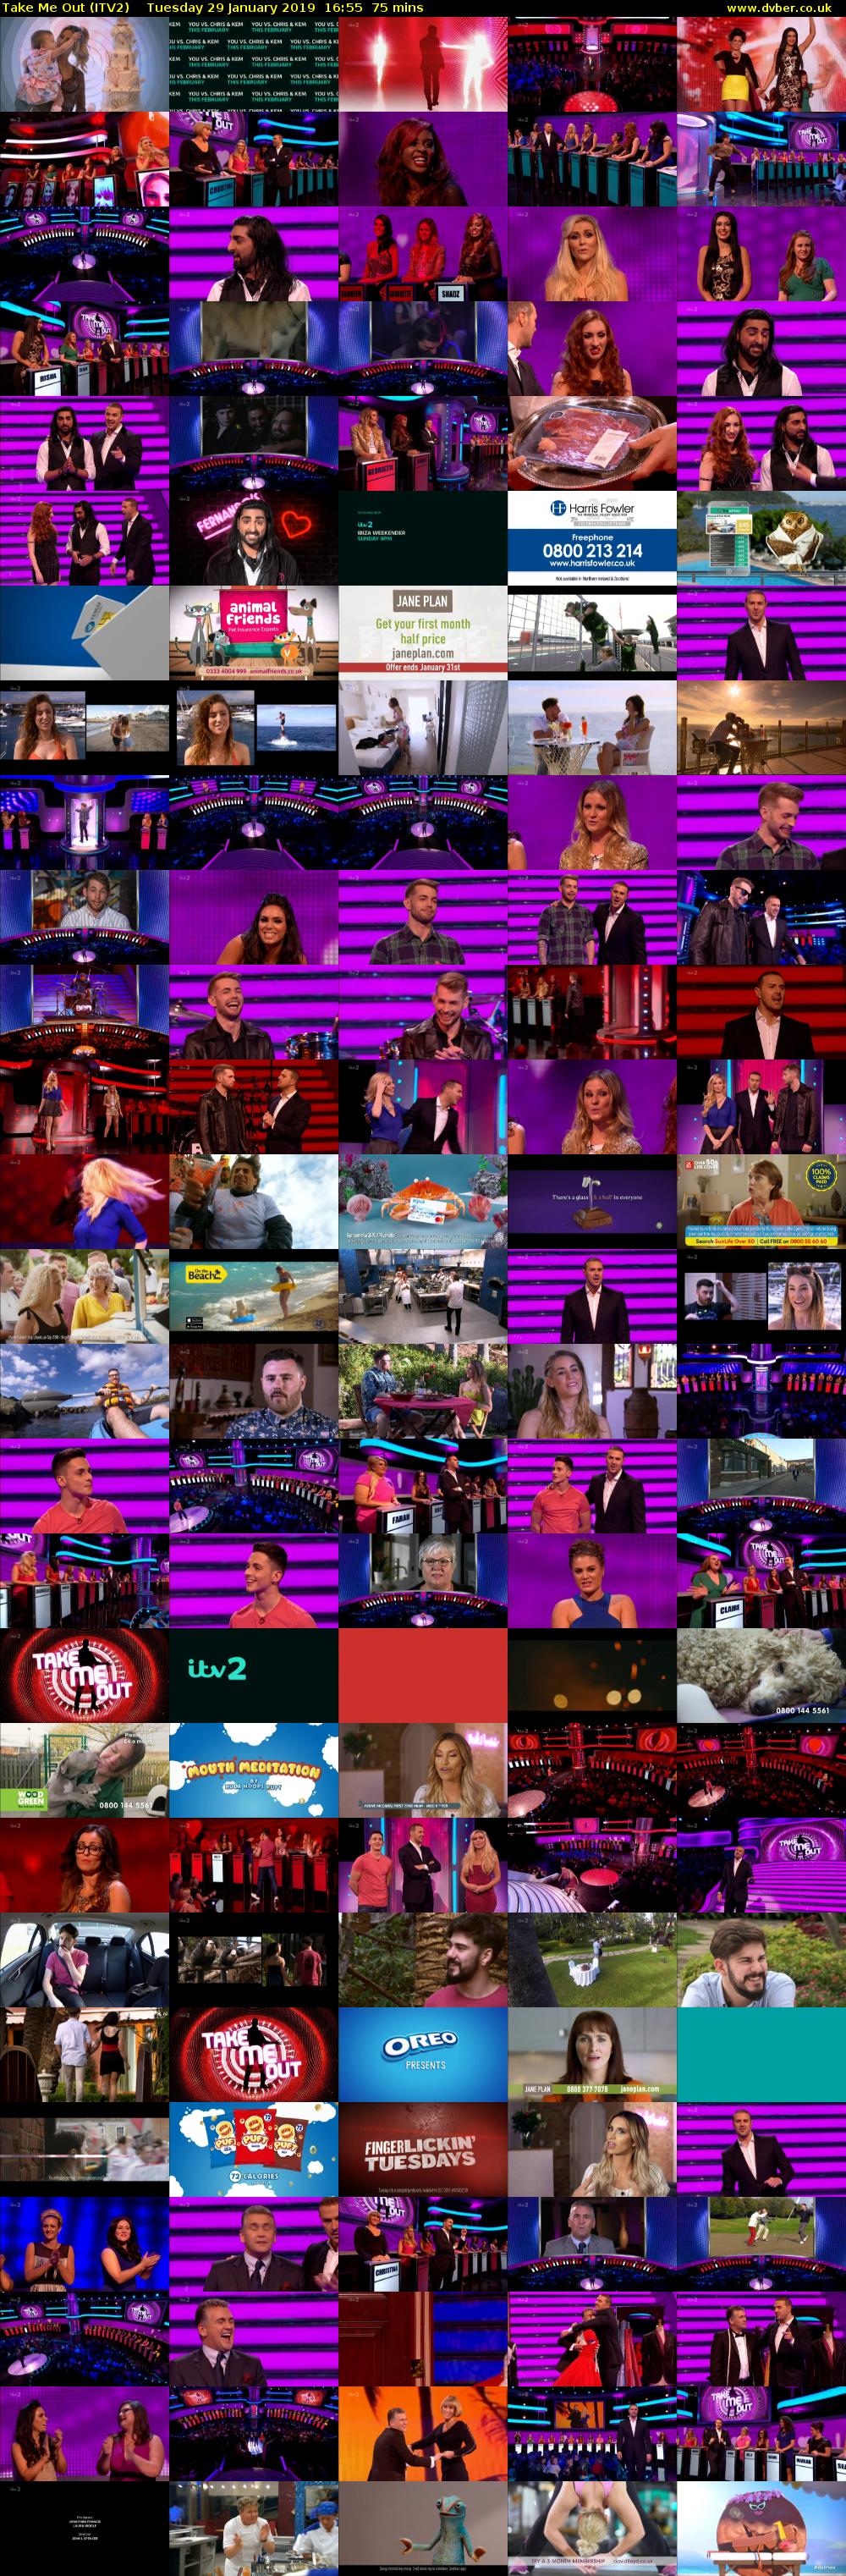 Take Me Out (ITV2) Tuesday 29 January 2019 16:55 - 18:10